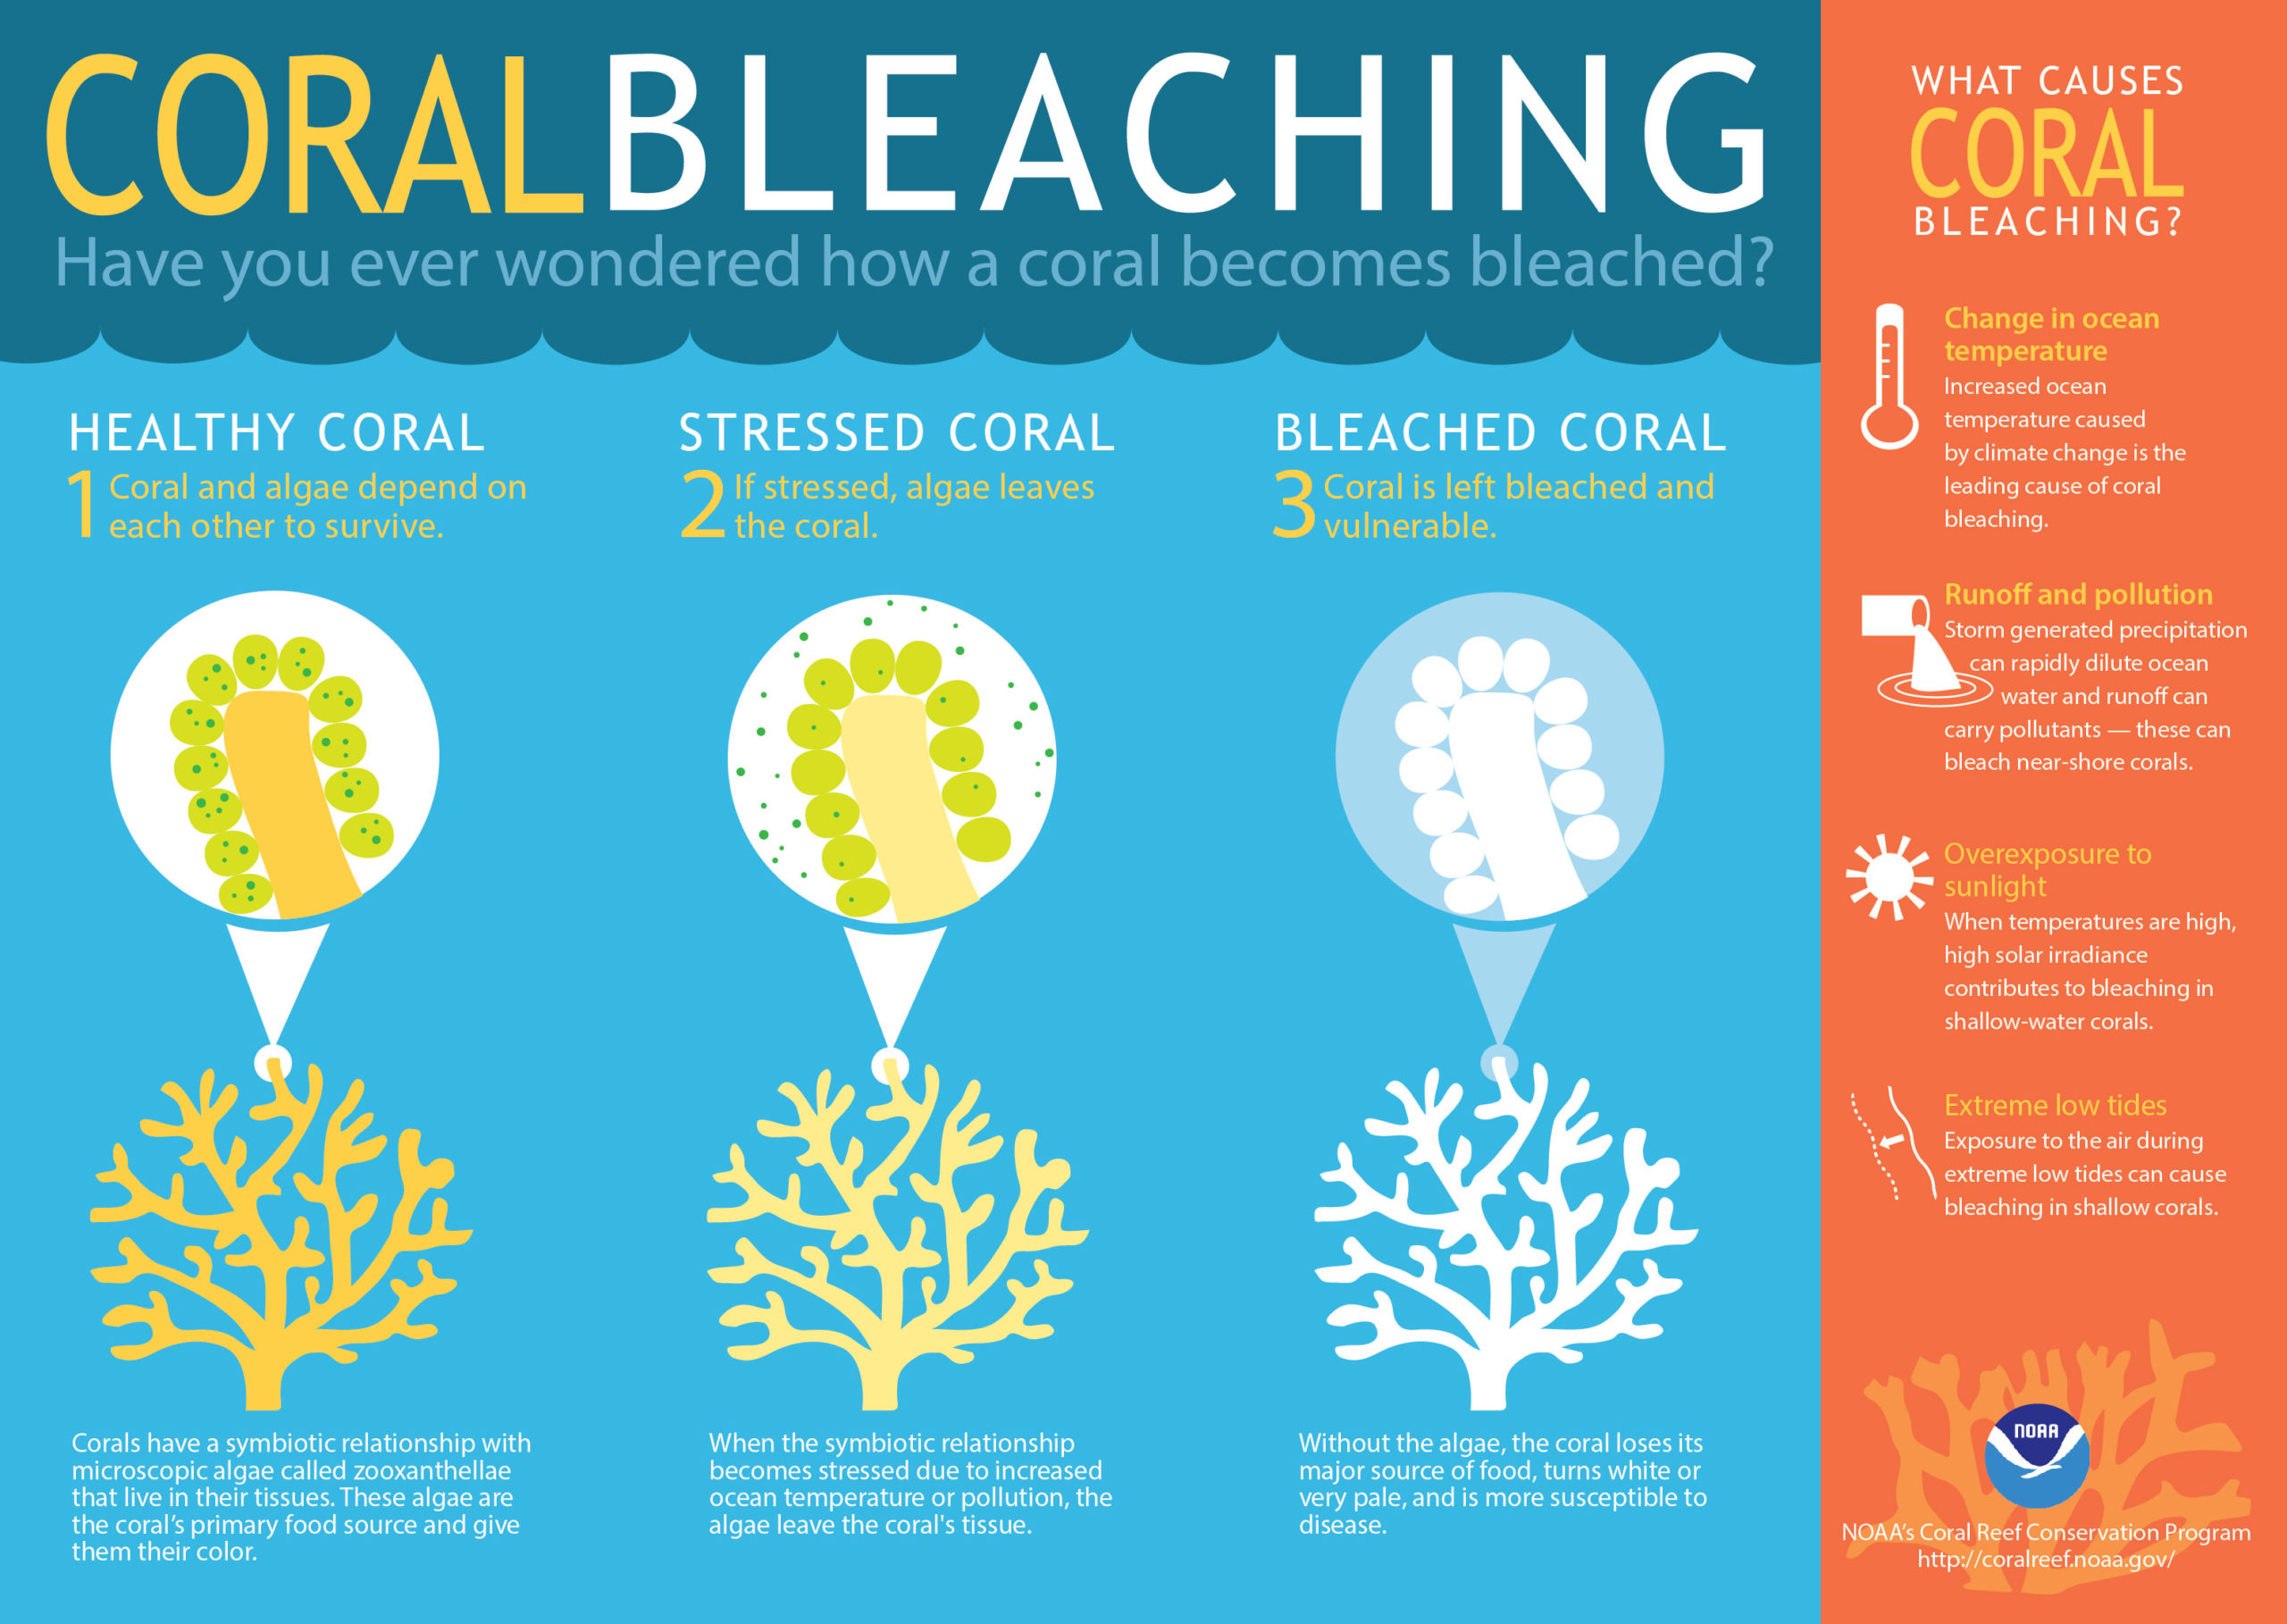 A Massive Bleaching Event Is Threatening The World’s Coral Reefs